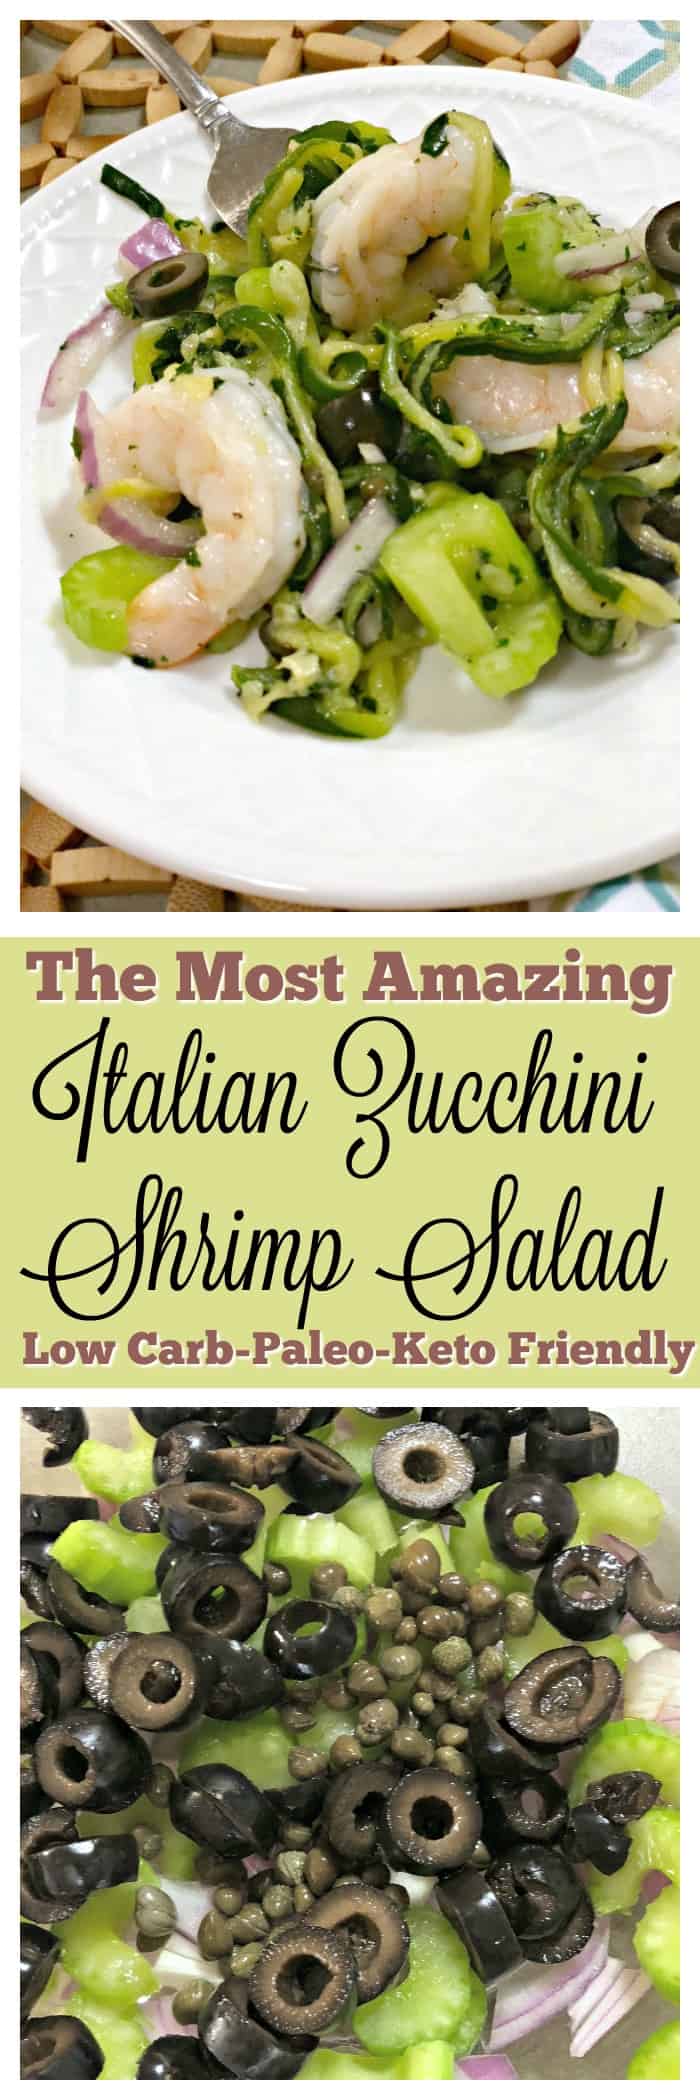 Italian Zucchini Shrimp Salad, Green Giant Veggie Spirals Recipes, How good are Green Giant Veggie Spirals, Low carb shrimp salad, fresh summer seafood salad, zoodle recipes, LCHF easy recipe, Weight Watchers shrimp salad